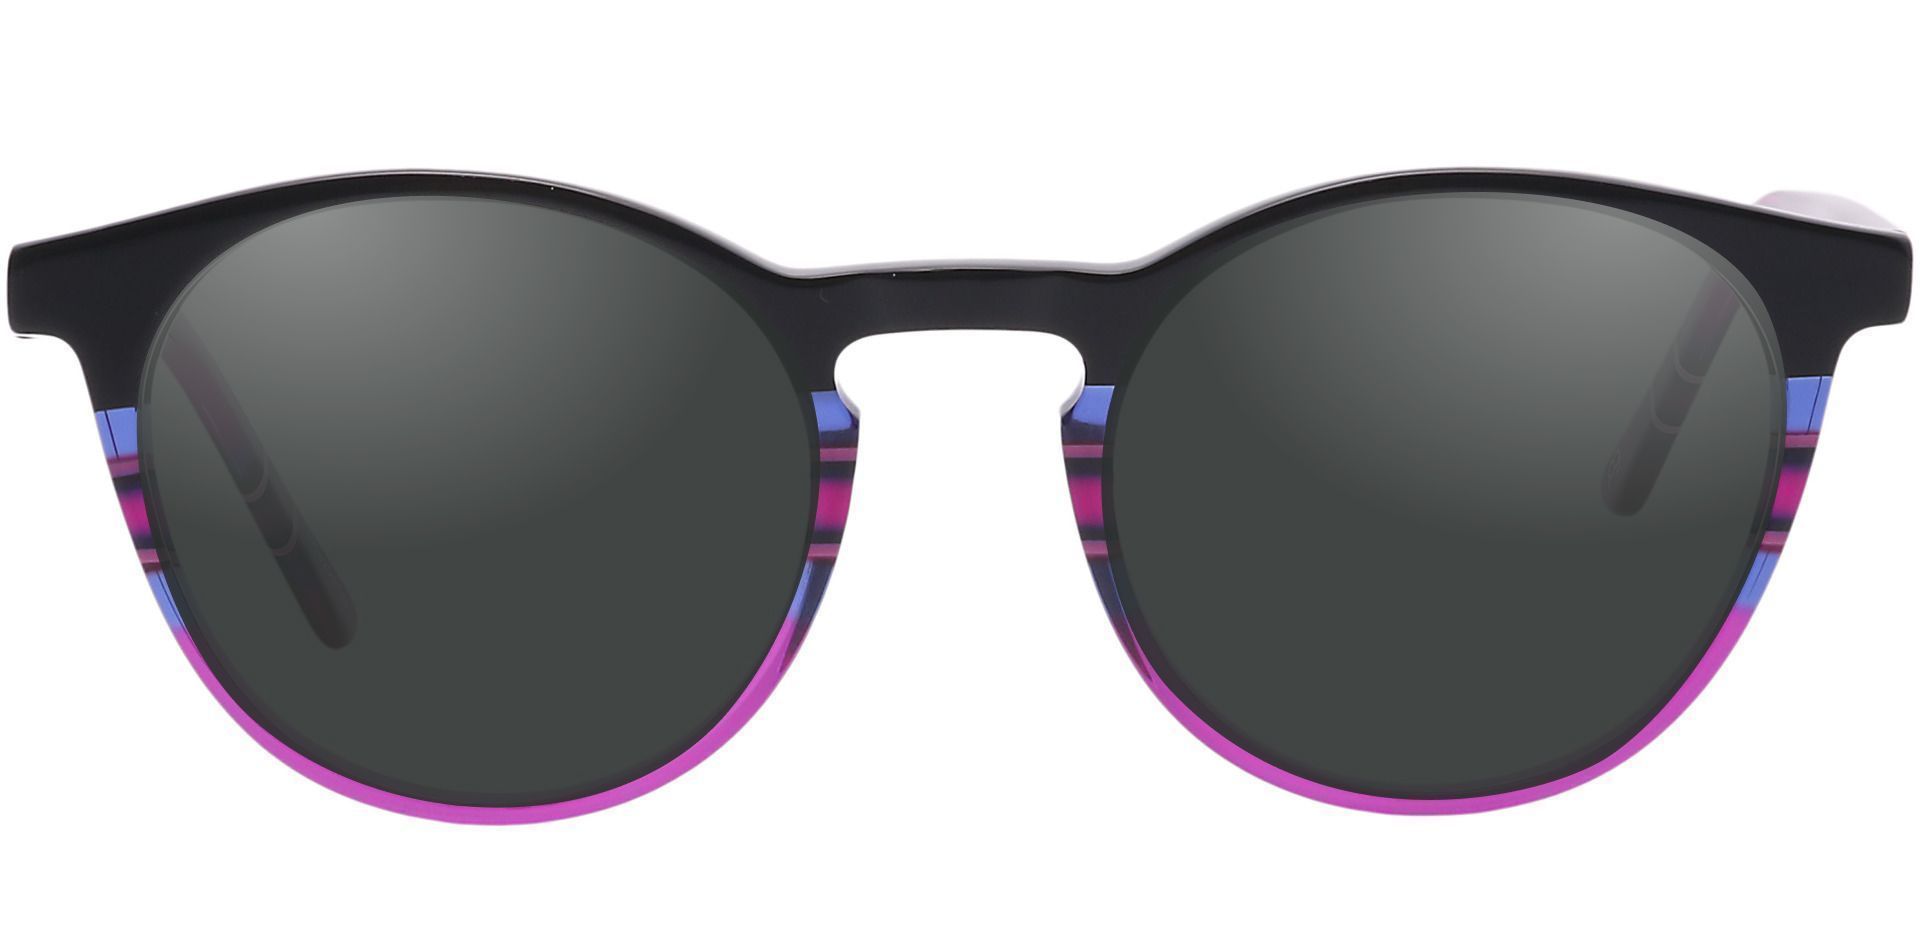 Jellie Round Non-Rx Sunglasses - Purple Frame With Gray Lenses